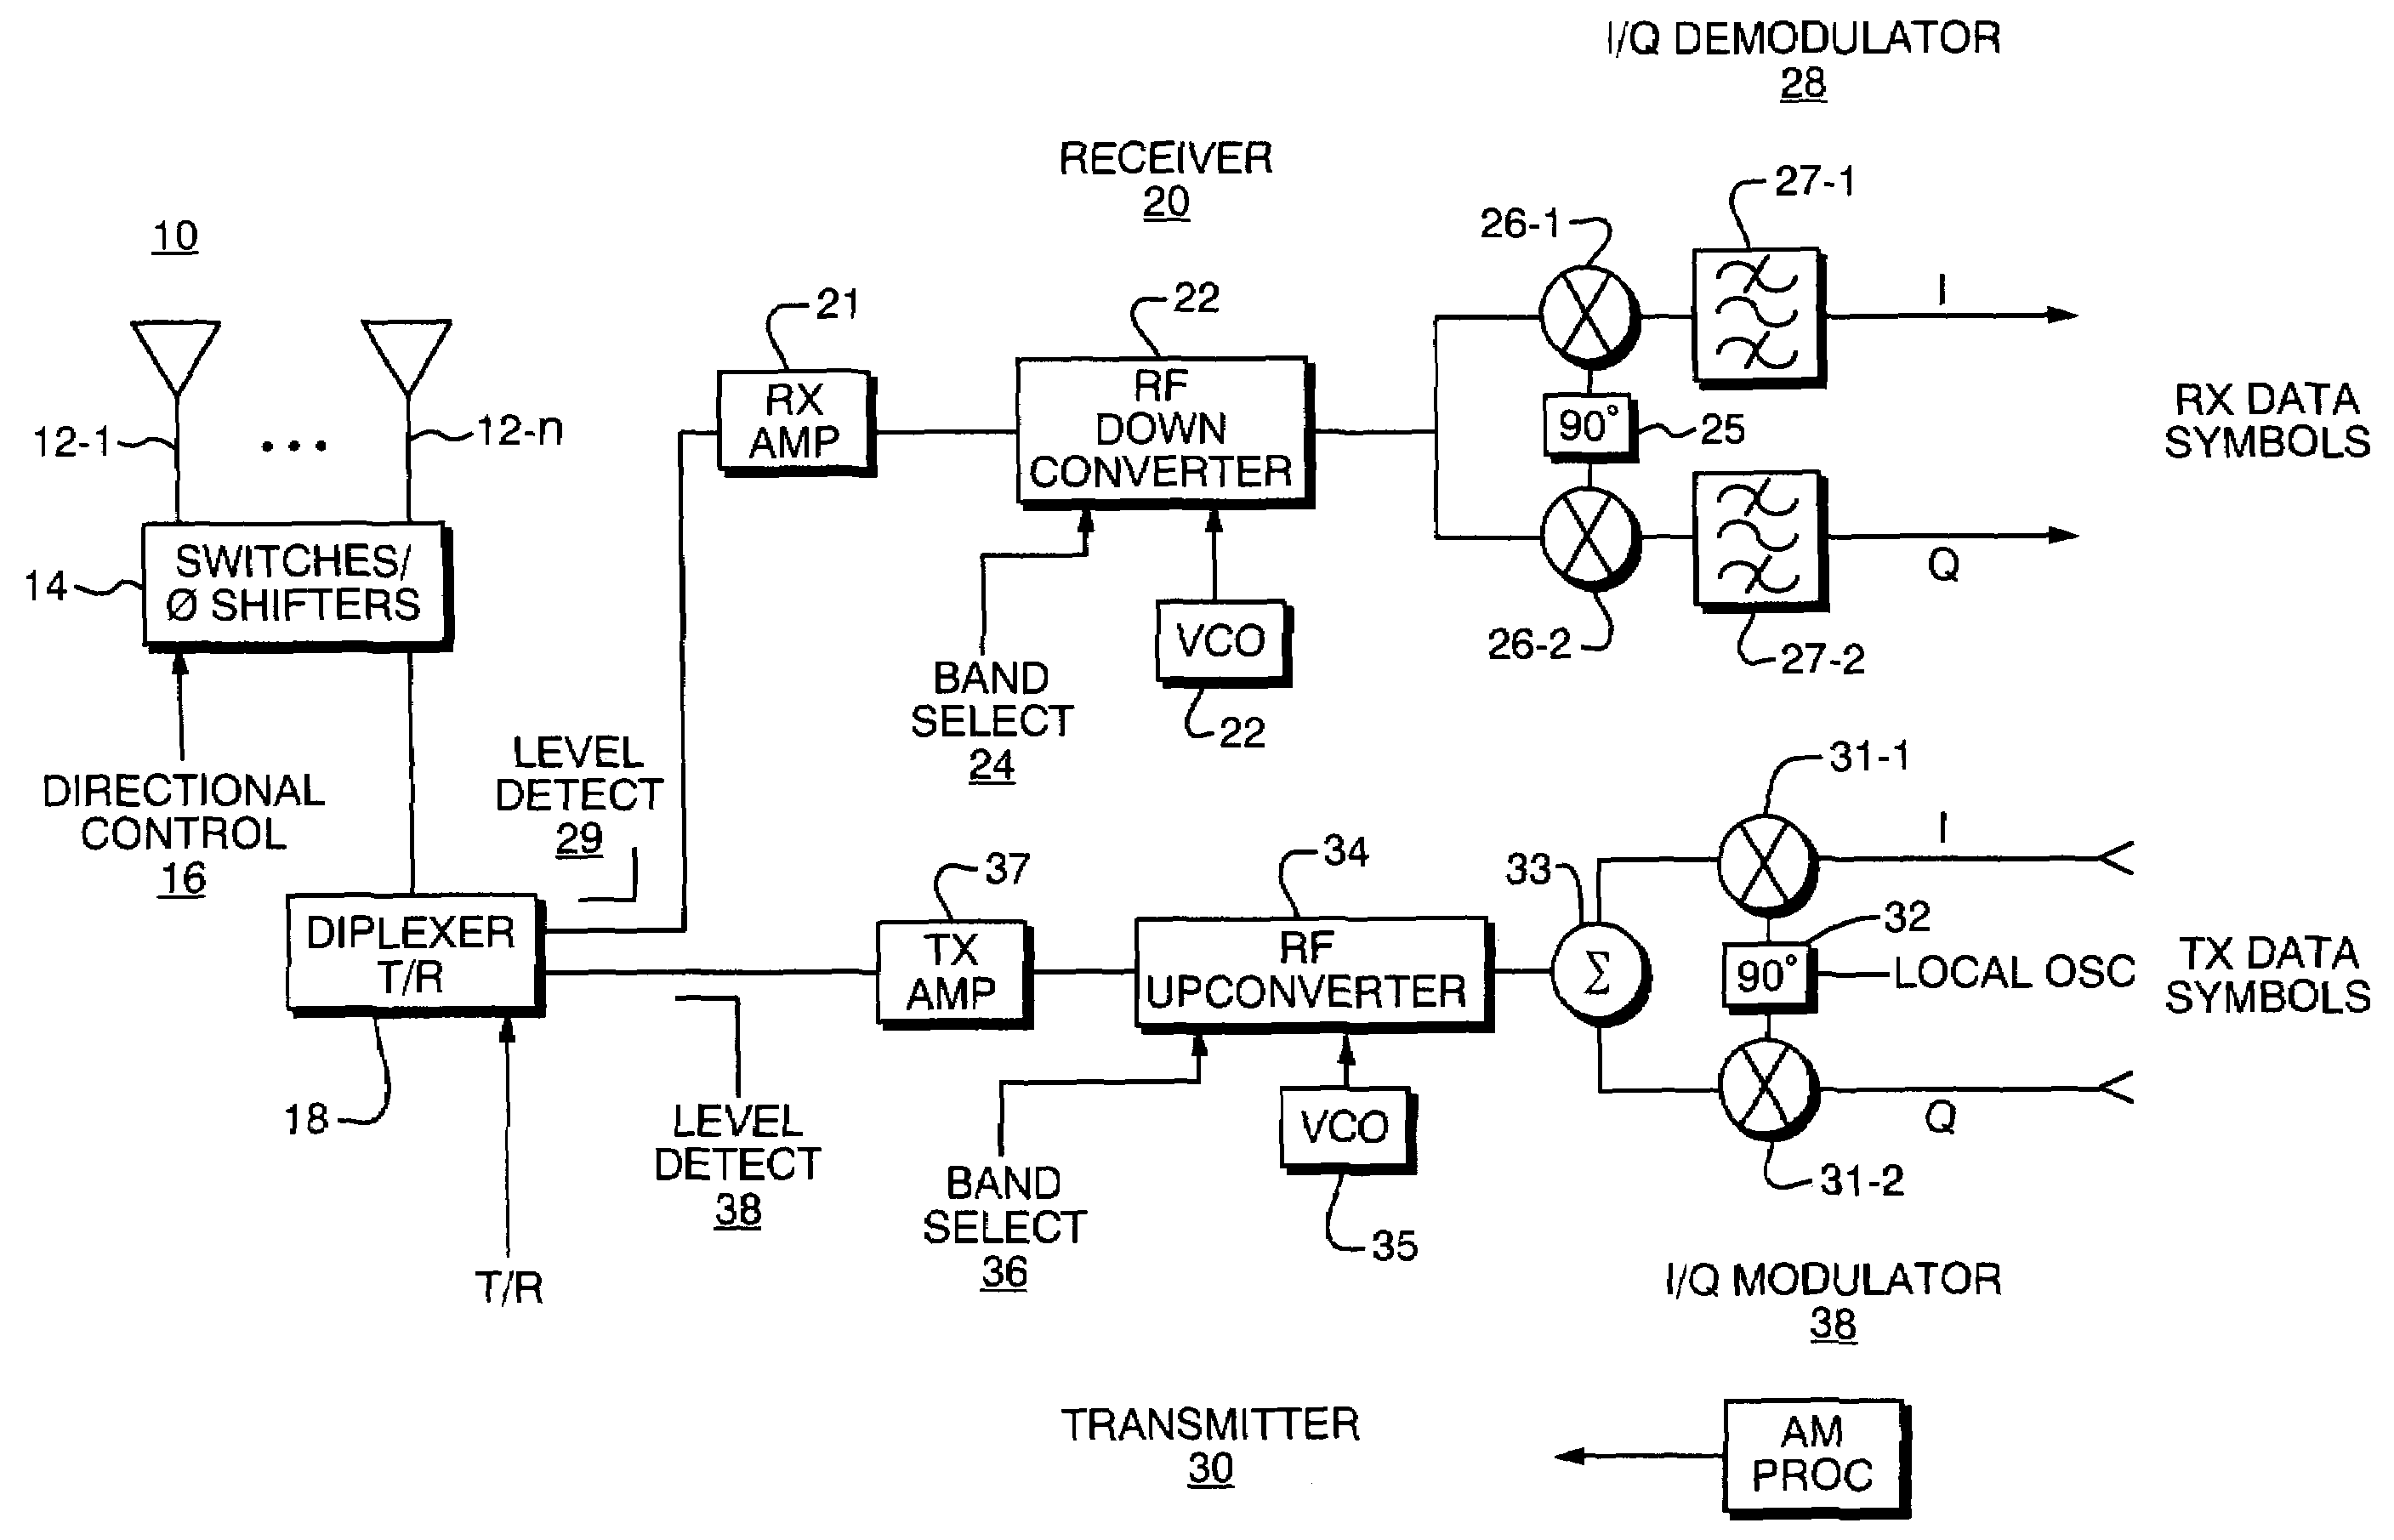 Antenna adaptation in a time division duplexing system